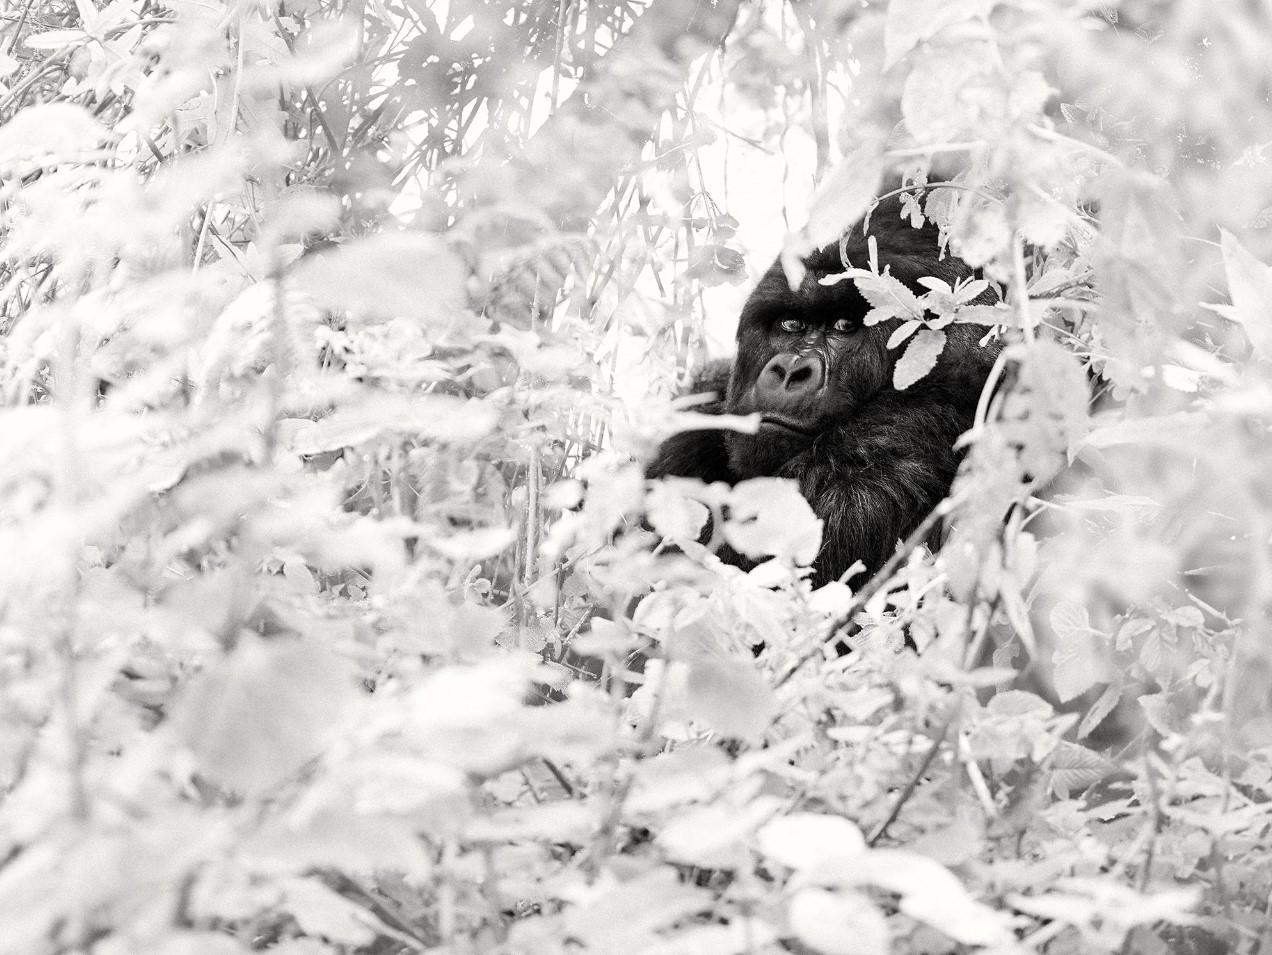 Joachim Schmeisser Still-Life Photograph - Silverback - gorilla sitting inbetween leaves and looking at camera in b&w